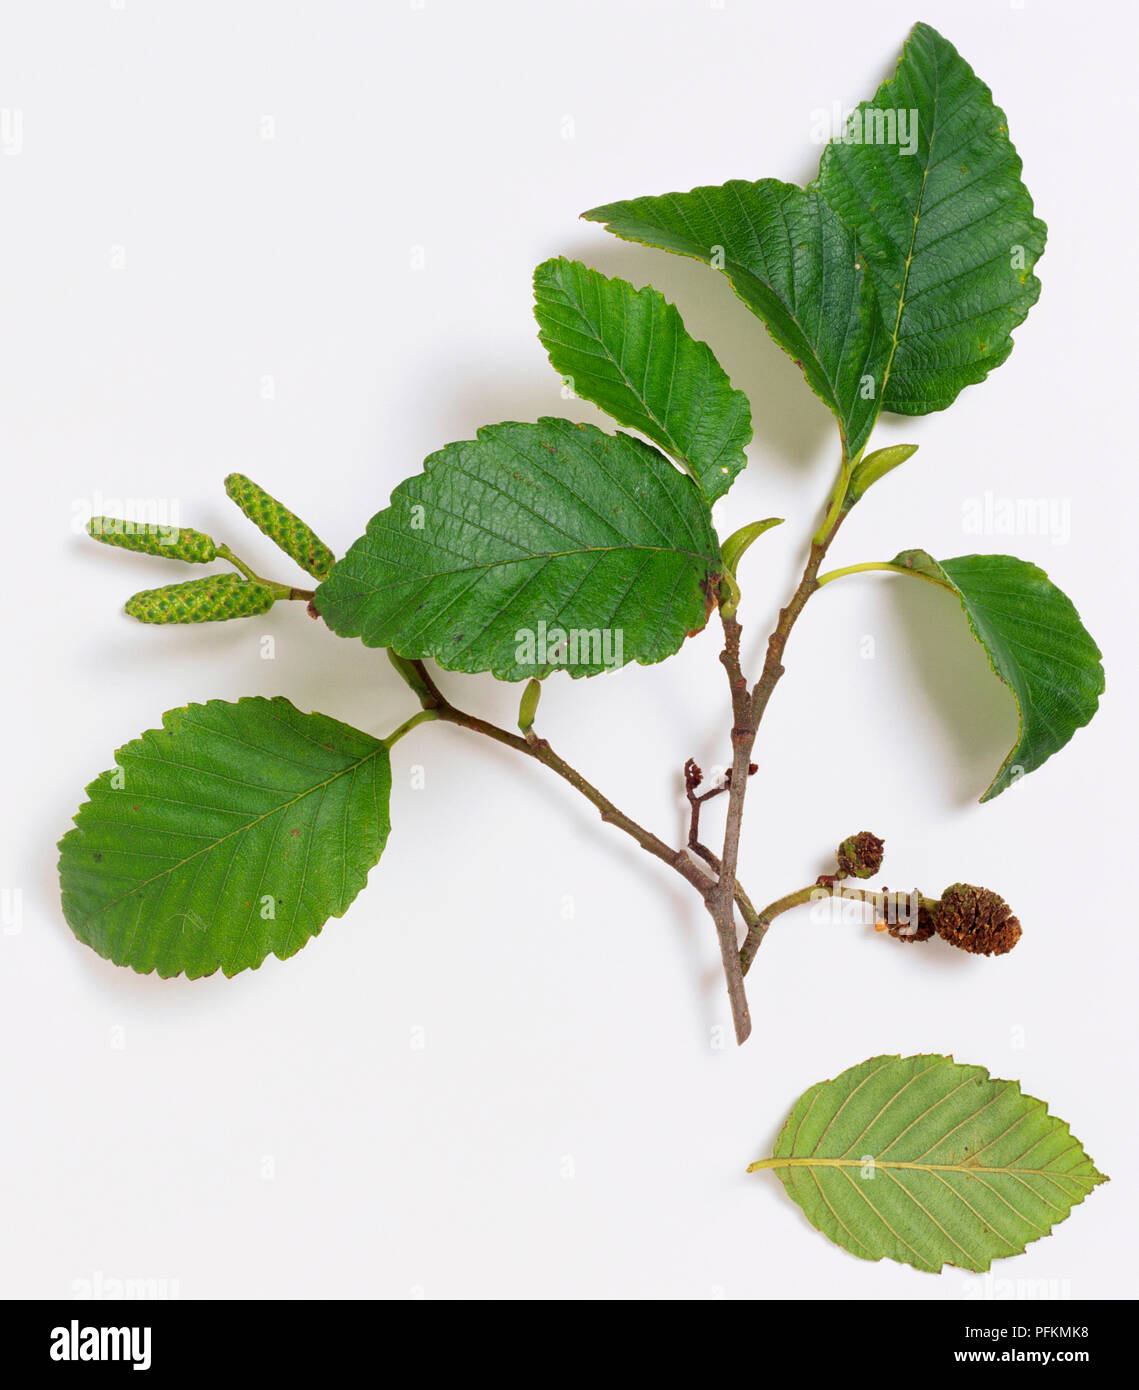 Alnus rubra (Red Alder), green leaves, catkins, and dried fruit on branchlet Stock Photo